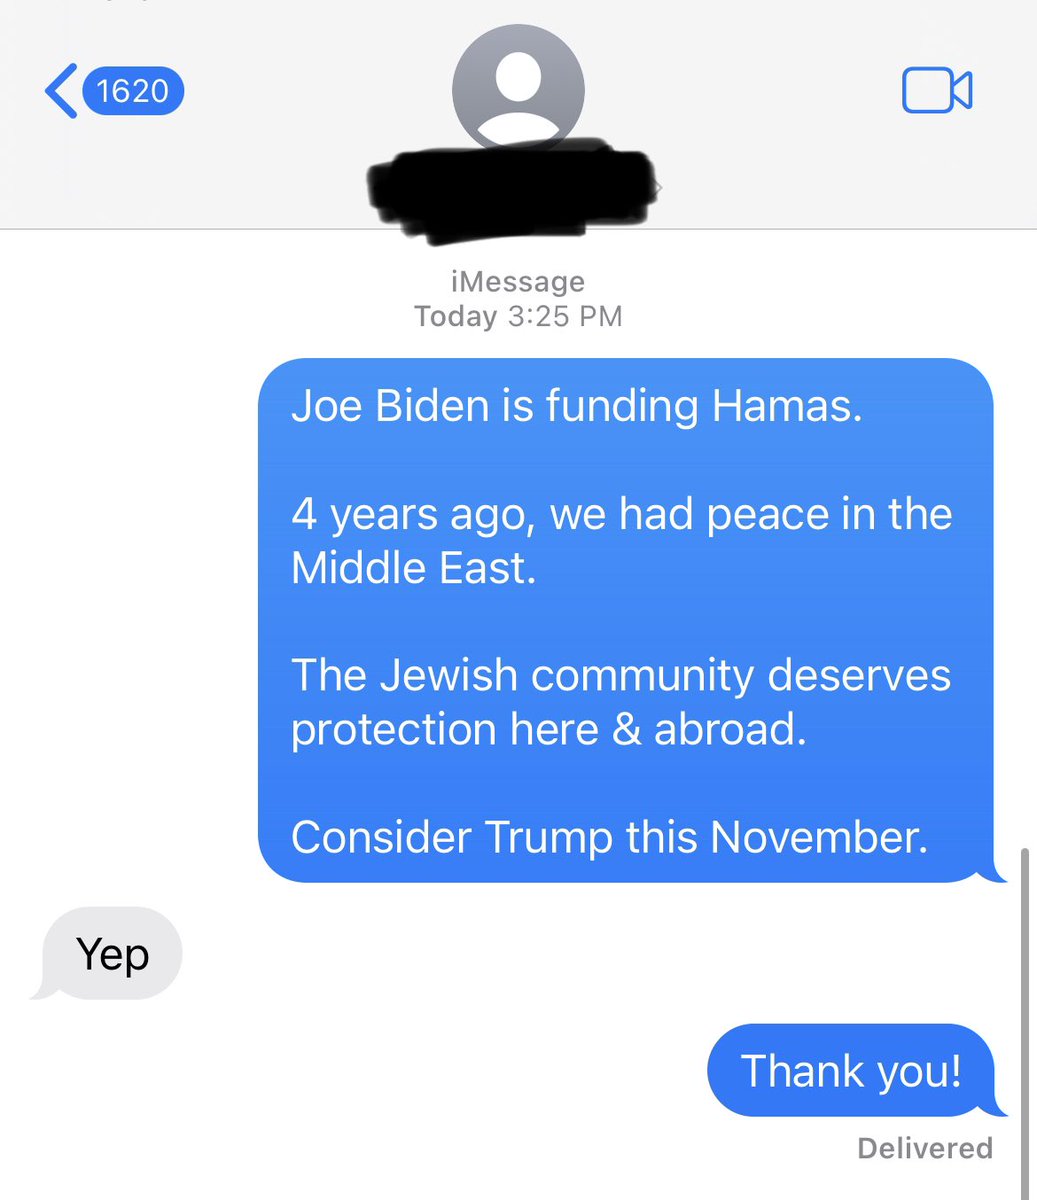 HOLY COW! We are texting no party affiliated Pennsylvania Jewish voters: “Joe Biden is funding Hamas. 4 years ago, we had peace in the Middle East. The Jewish community deserves protection here & abroad. Consider Trump this November.” I’m texting w/ the voter RIGHT NOW